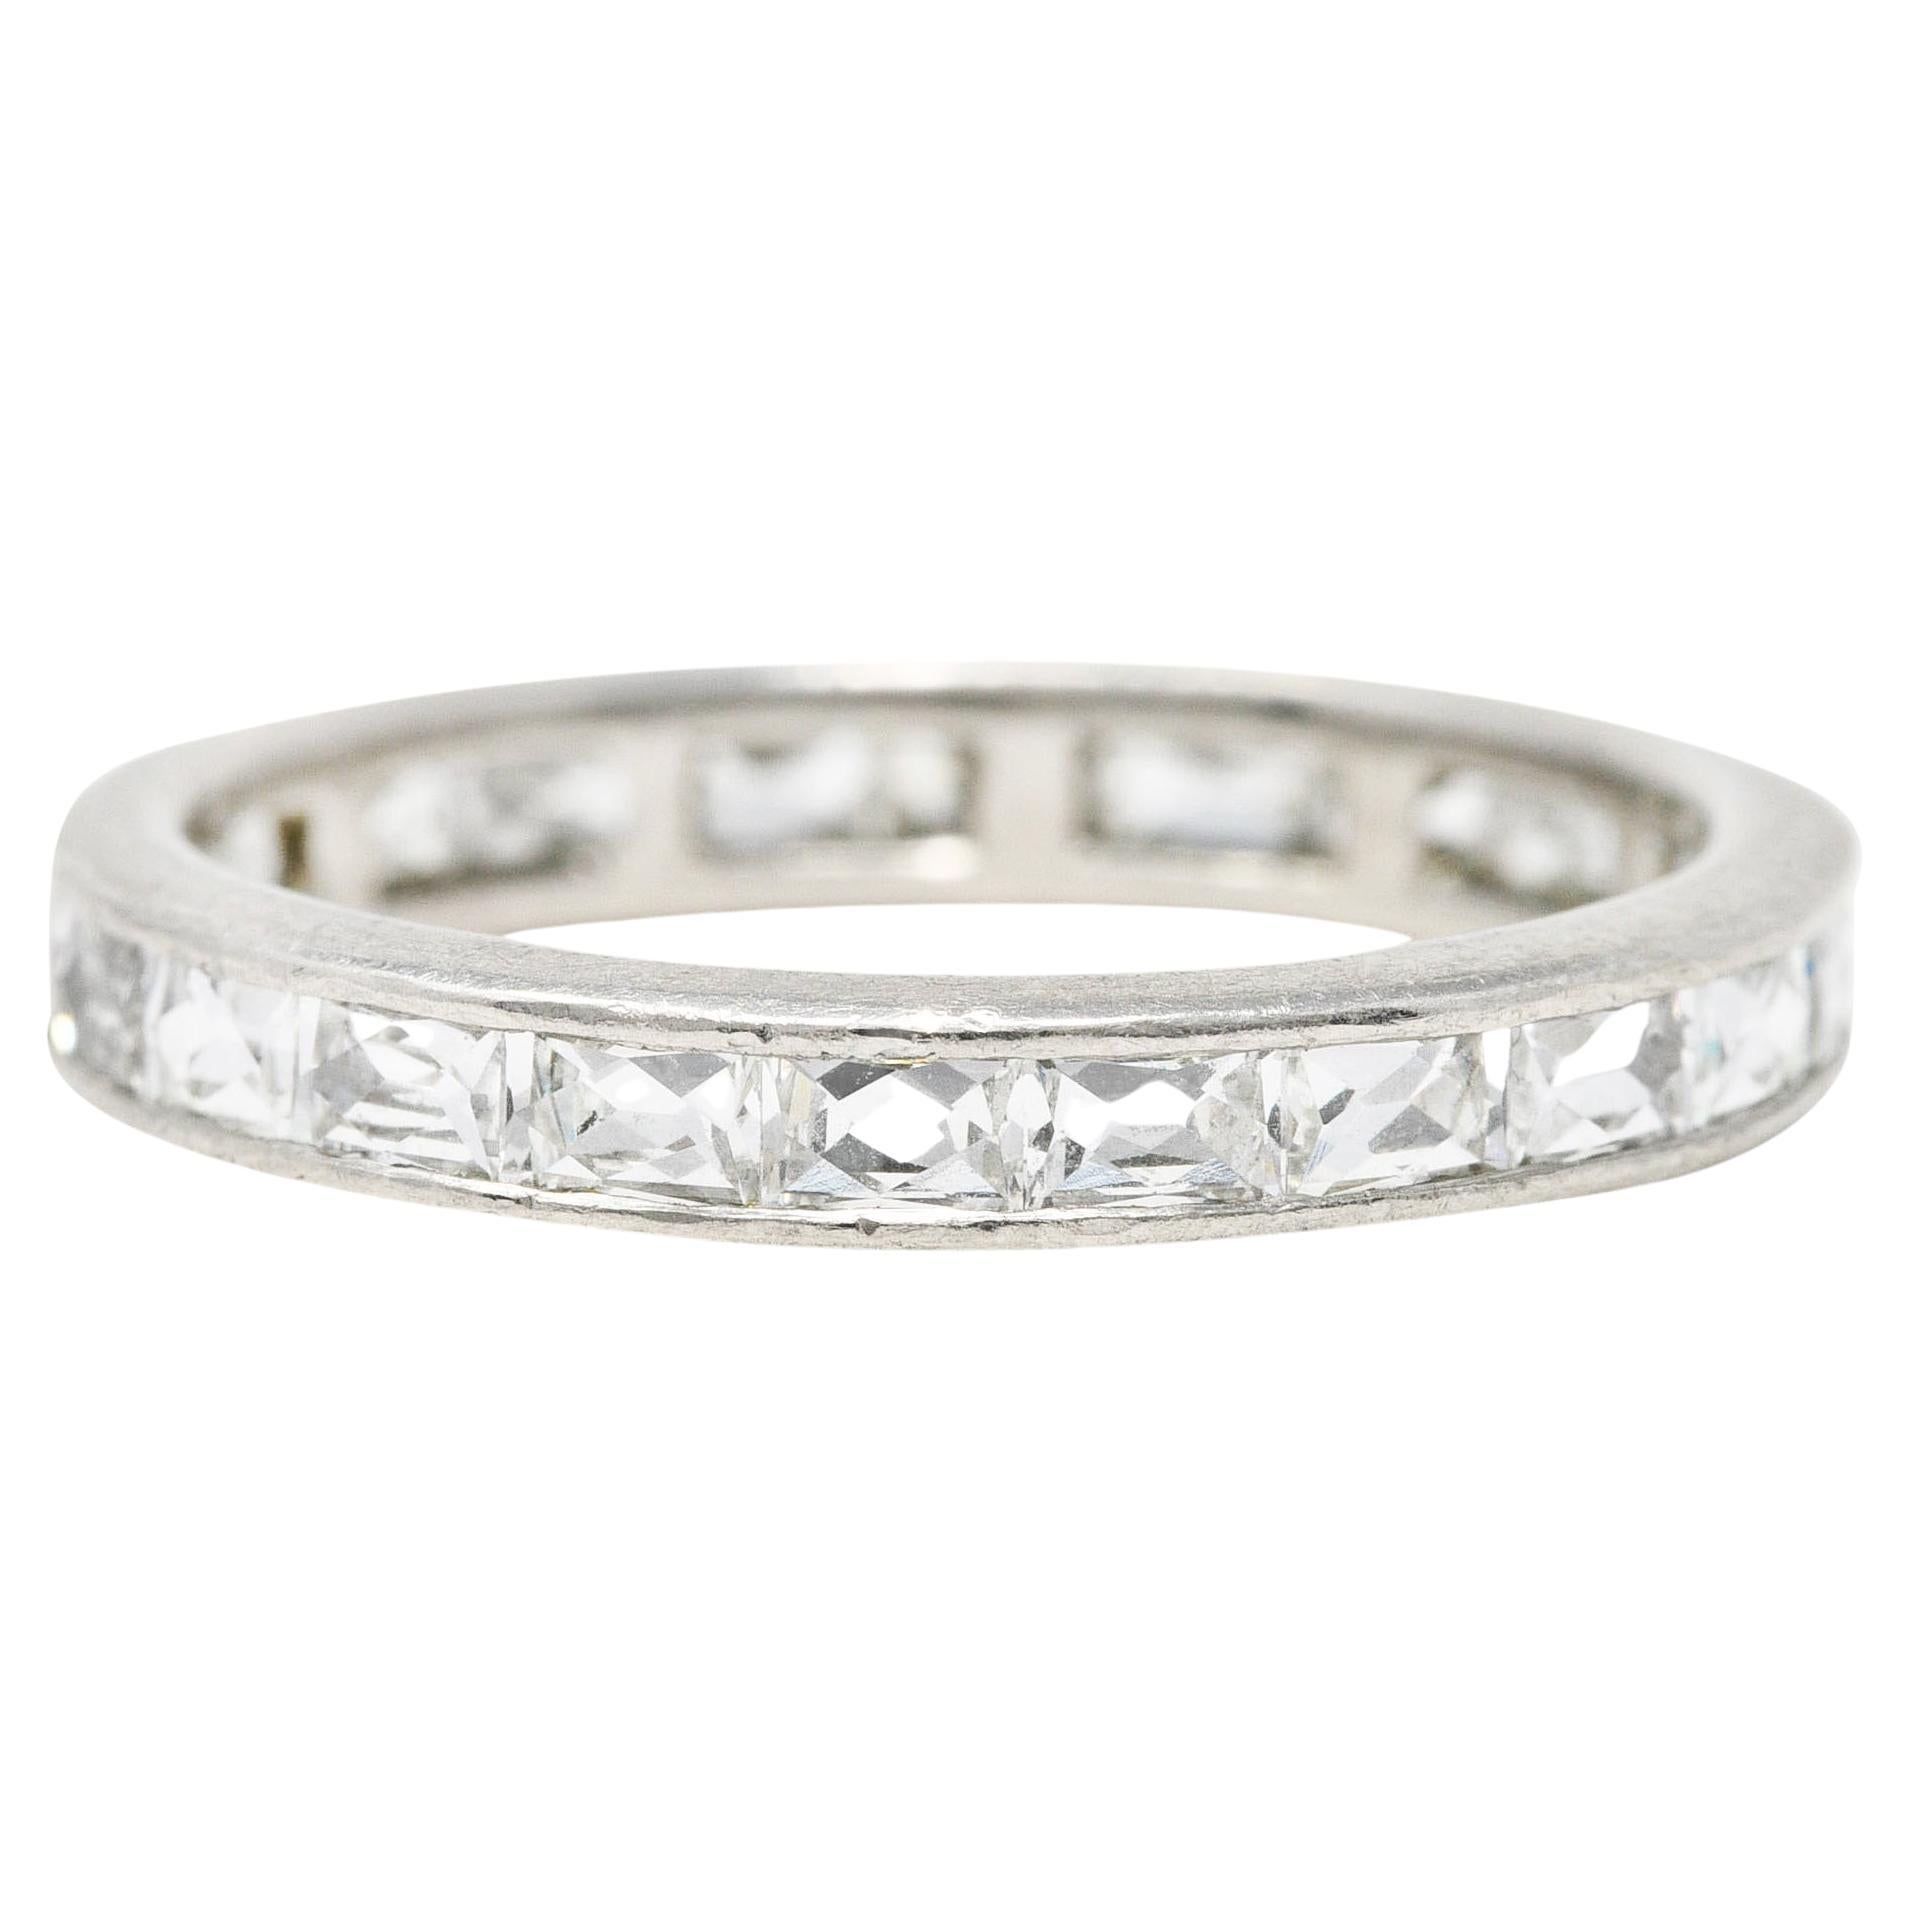 Neil Lane Couture French Cut 2.05 Carats Diamond Eternity Channel Band Ring